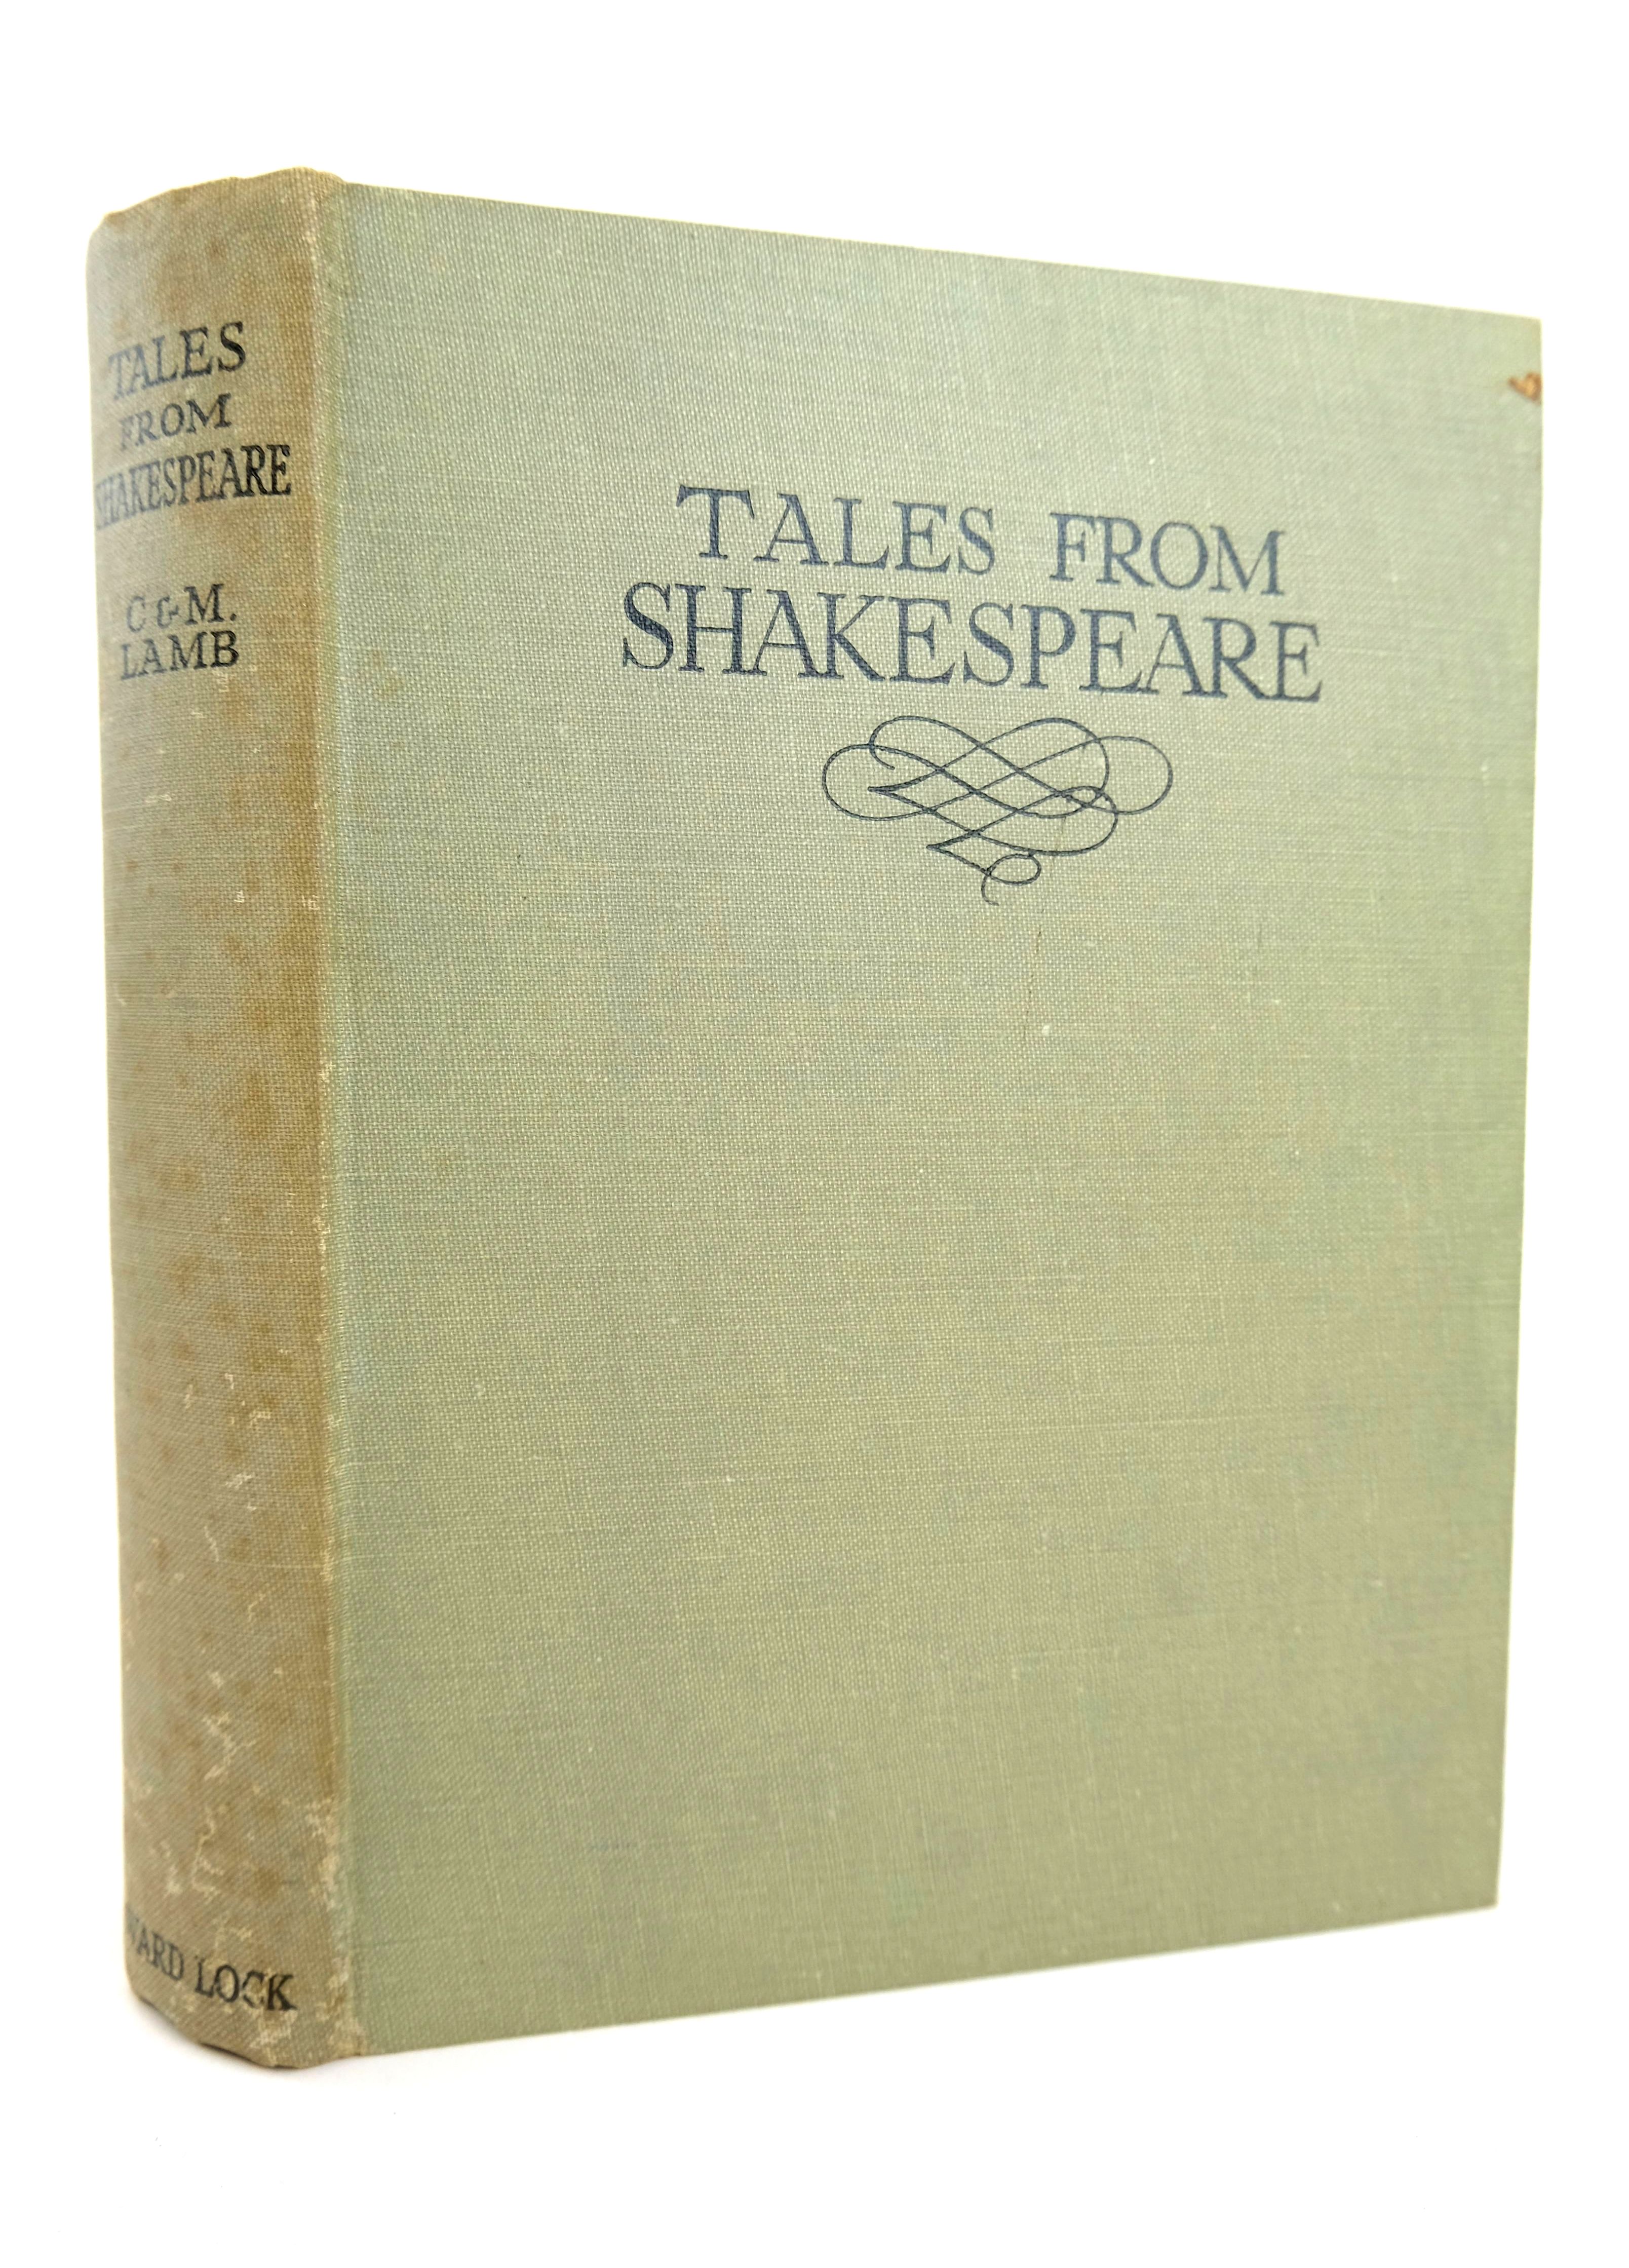 Photo of TALES FROM SHAKESPEARE written by Lamb, Charles
Lamb, Mary illustrated by Jackson, A.E. published by Ward, Lock & Co. Ltd. (STOCK CODE: 1318631)  for sale by Stella & Rose's Books